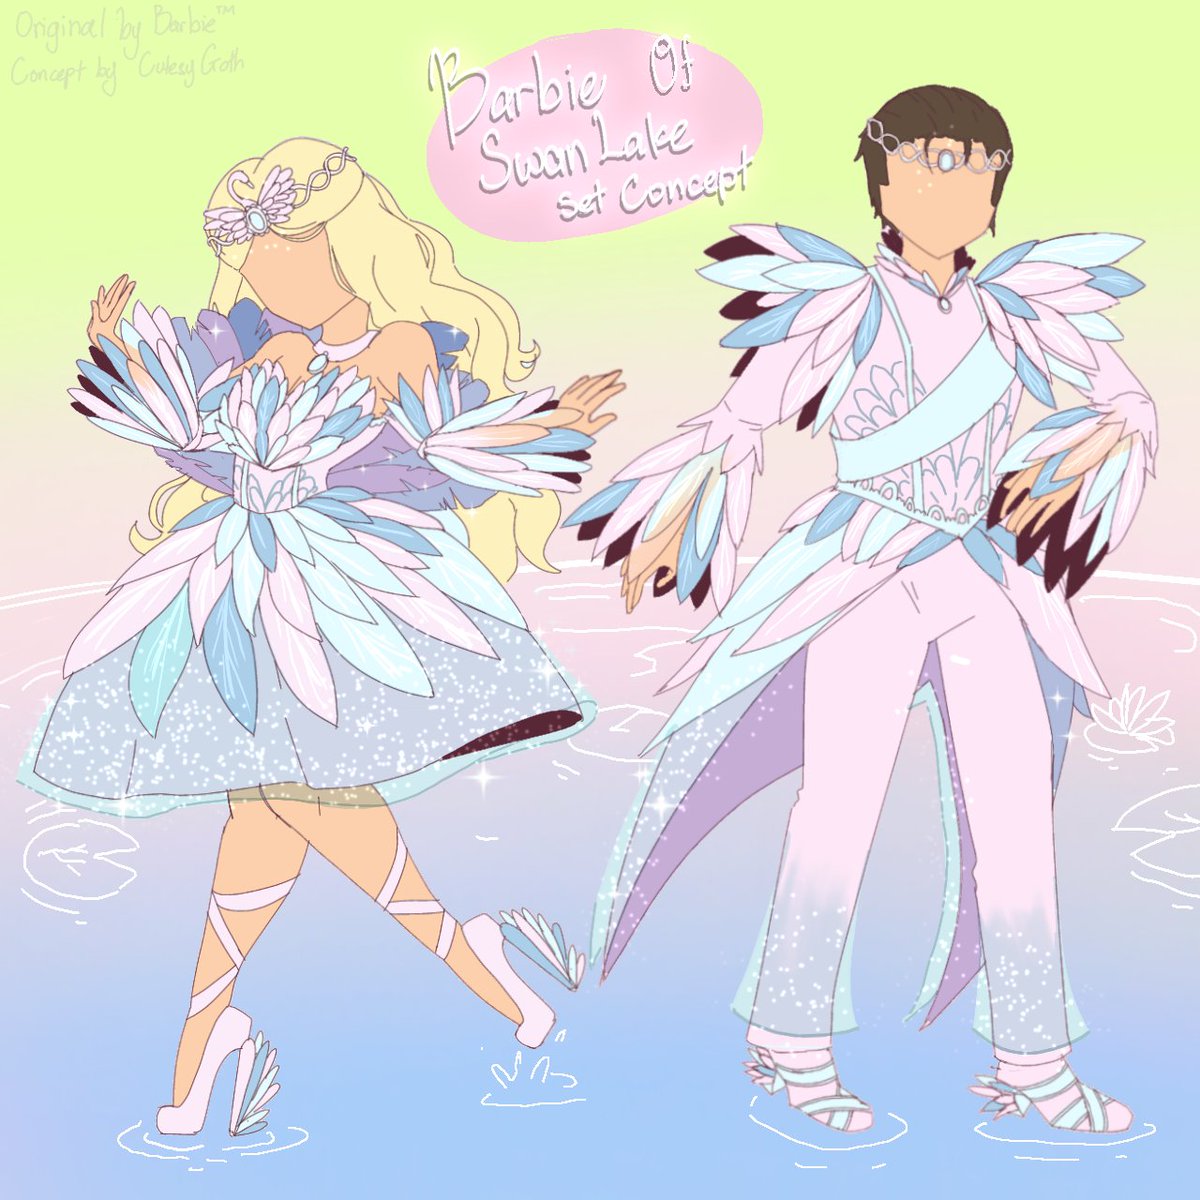 Snow swan set really reminds me of my old favourite barbie movie back then so pretty much my mind give me the idea and made a concept out of Barbie of Swan Lake ,sooner or later i be starting to model and potentially use it in any dress up game ❤️

#royalehigh #royalehighconcept